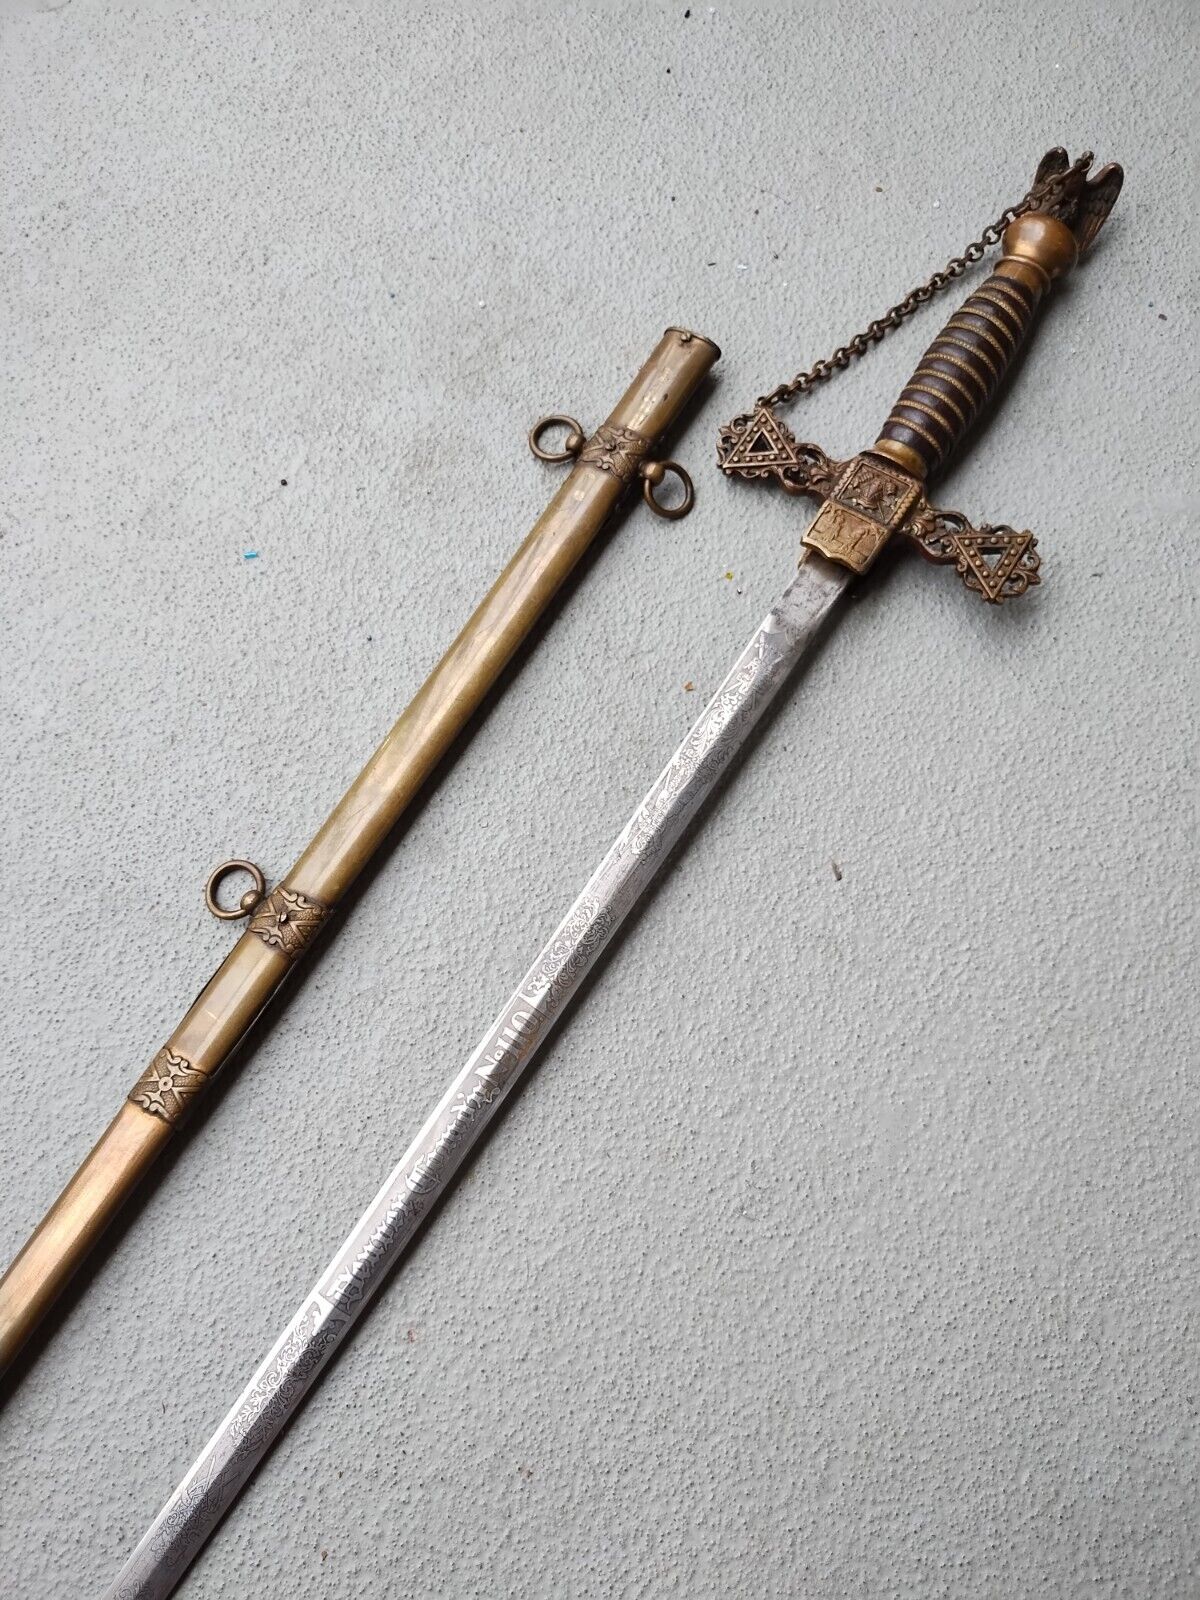 Victorian Sword Knight Of The Golden Eagle 1800's